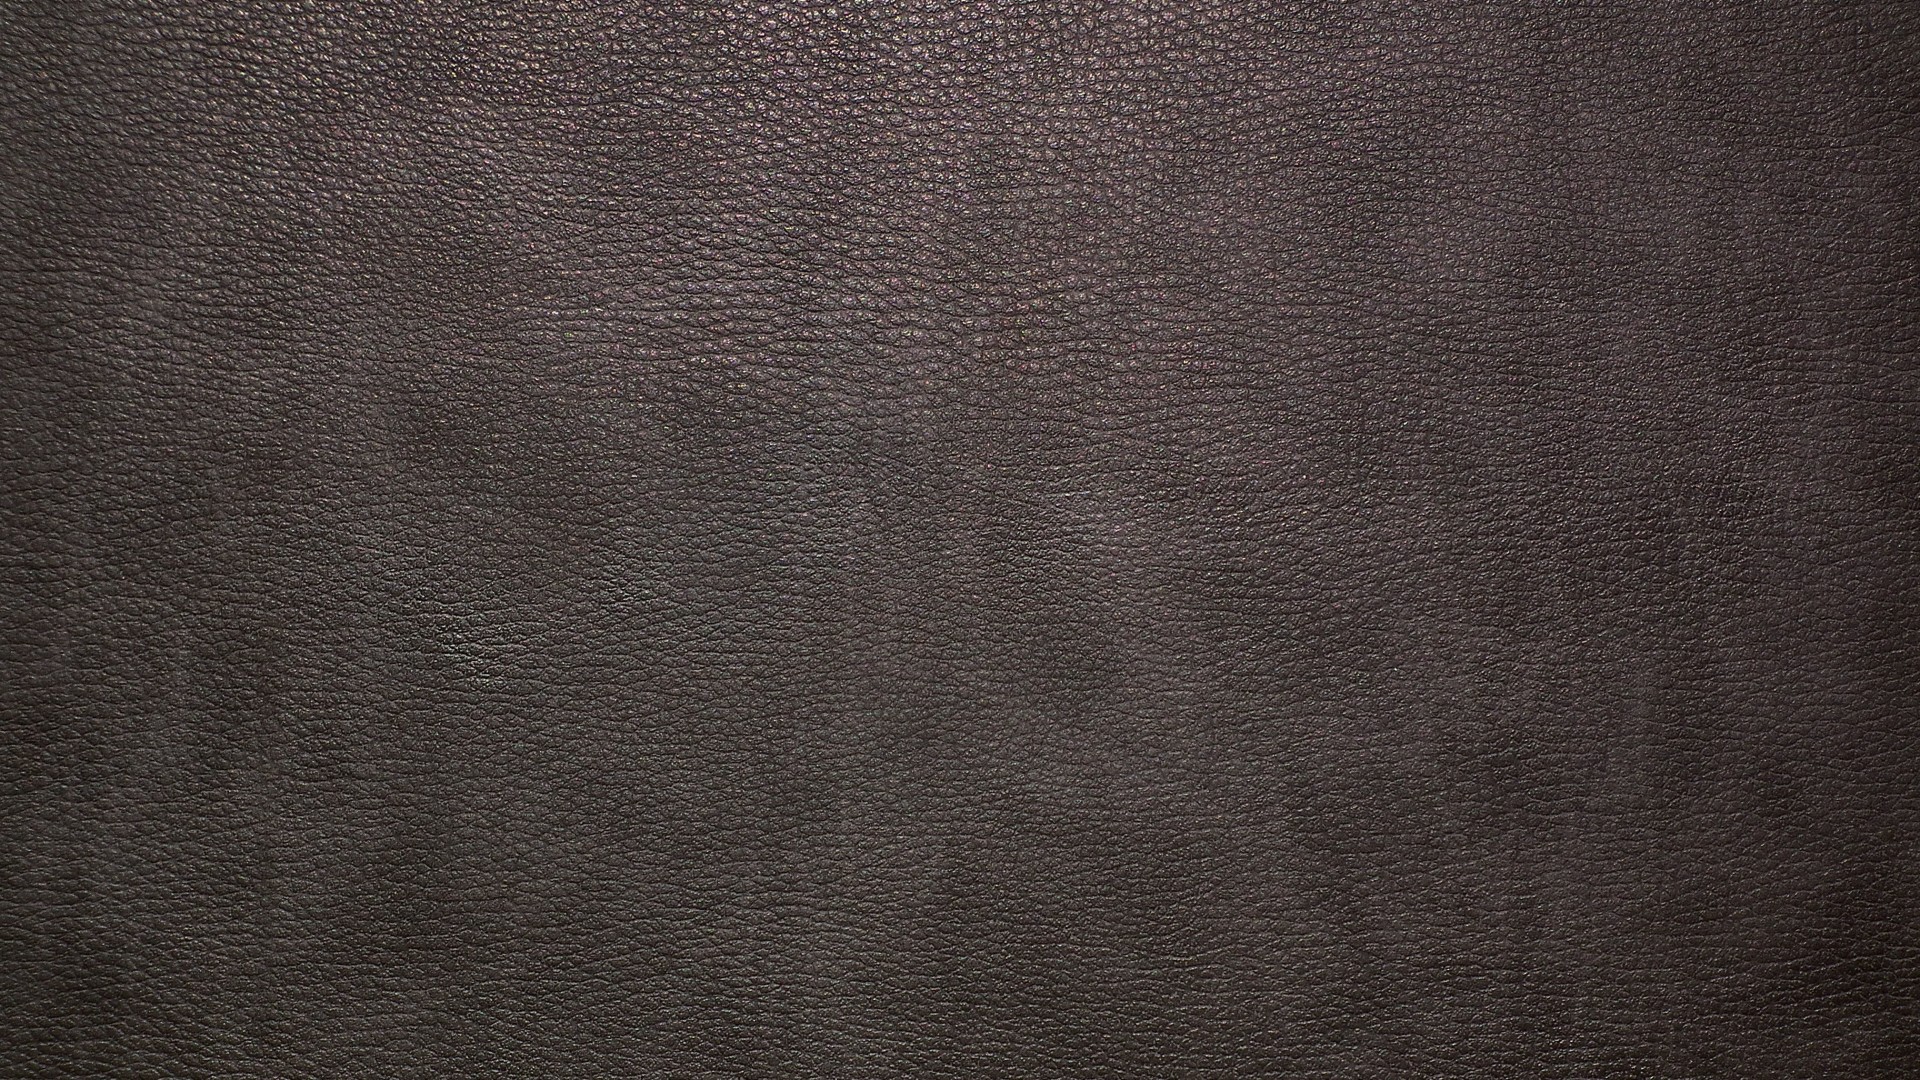 Brown Leather Wallpaper And Image Pictures Photos